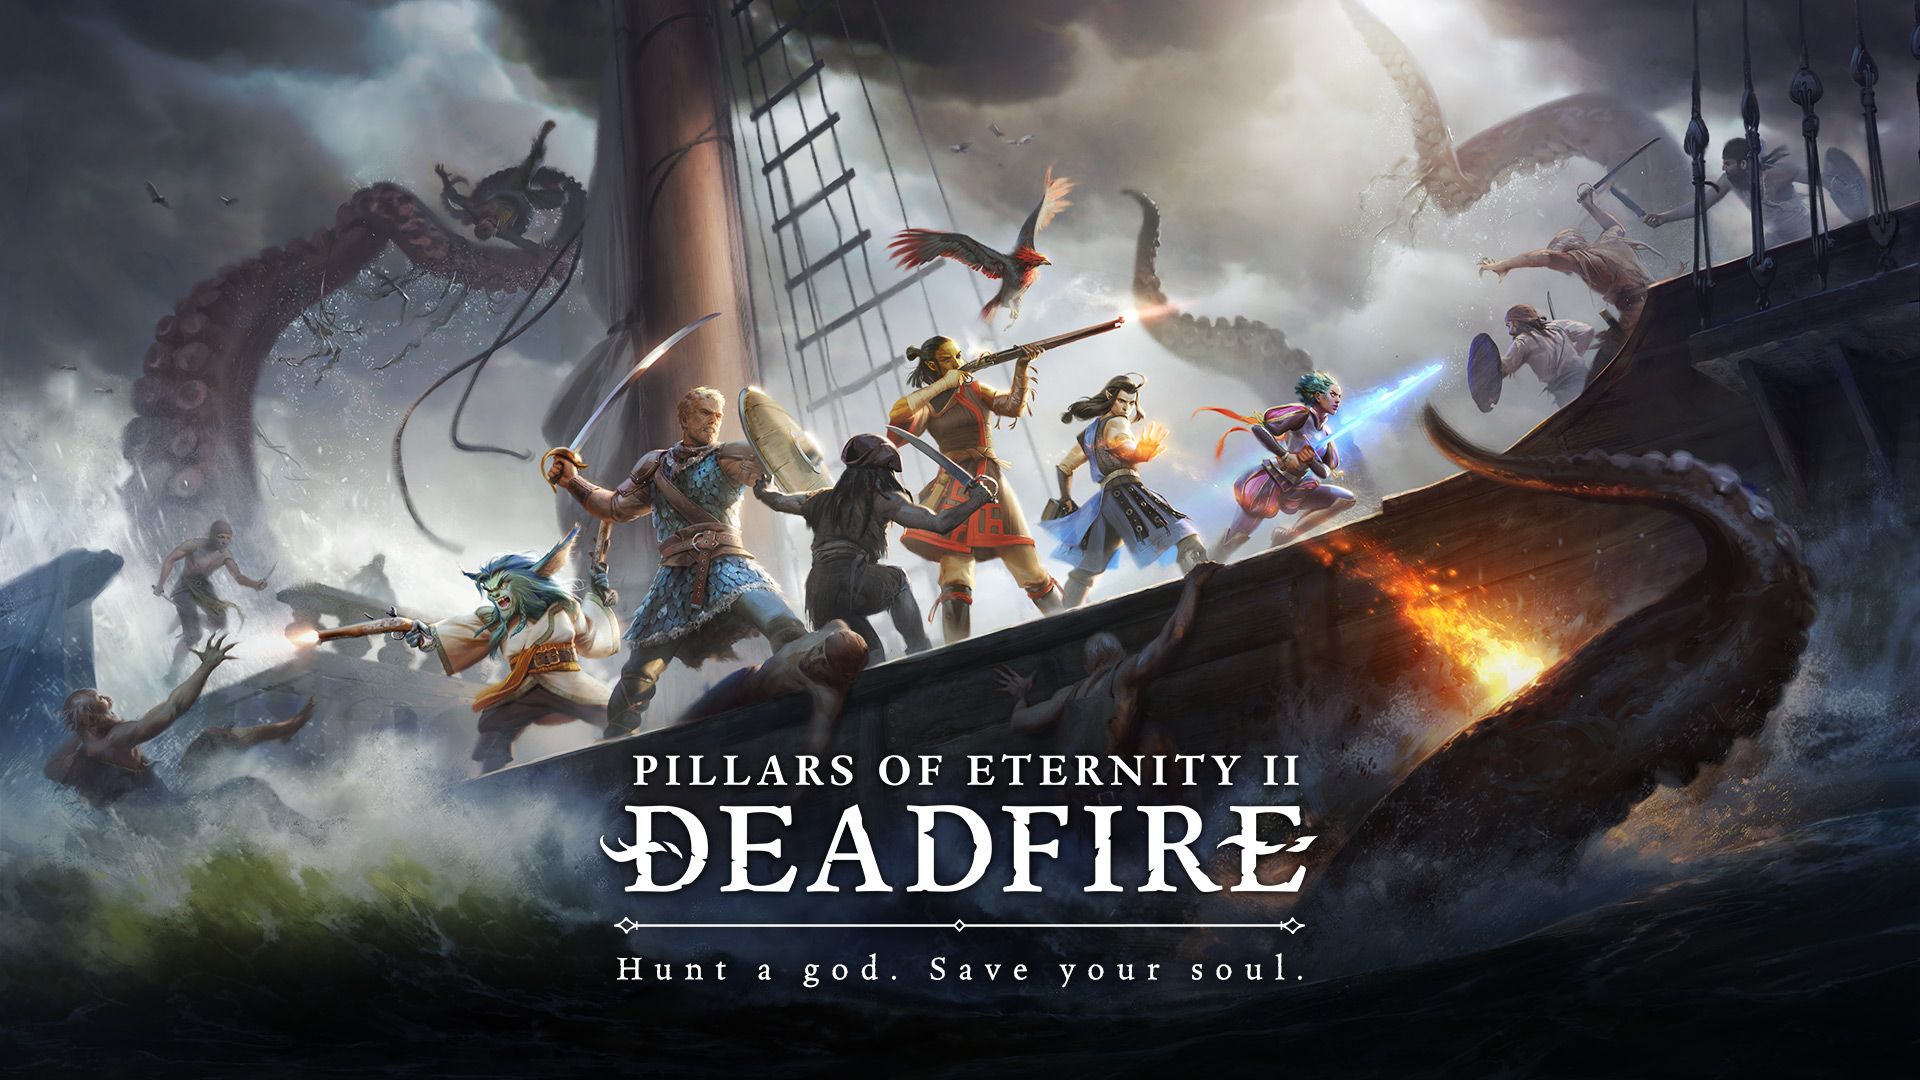 ballet kan opfattes person Pillars of Eternity II: Deadfire Gets Patch 5.0 - The Return of The Ultimate